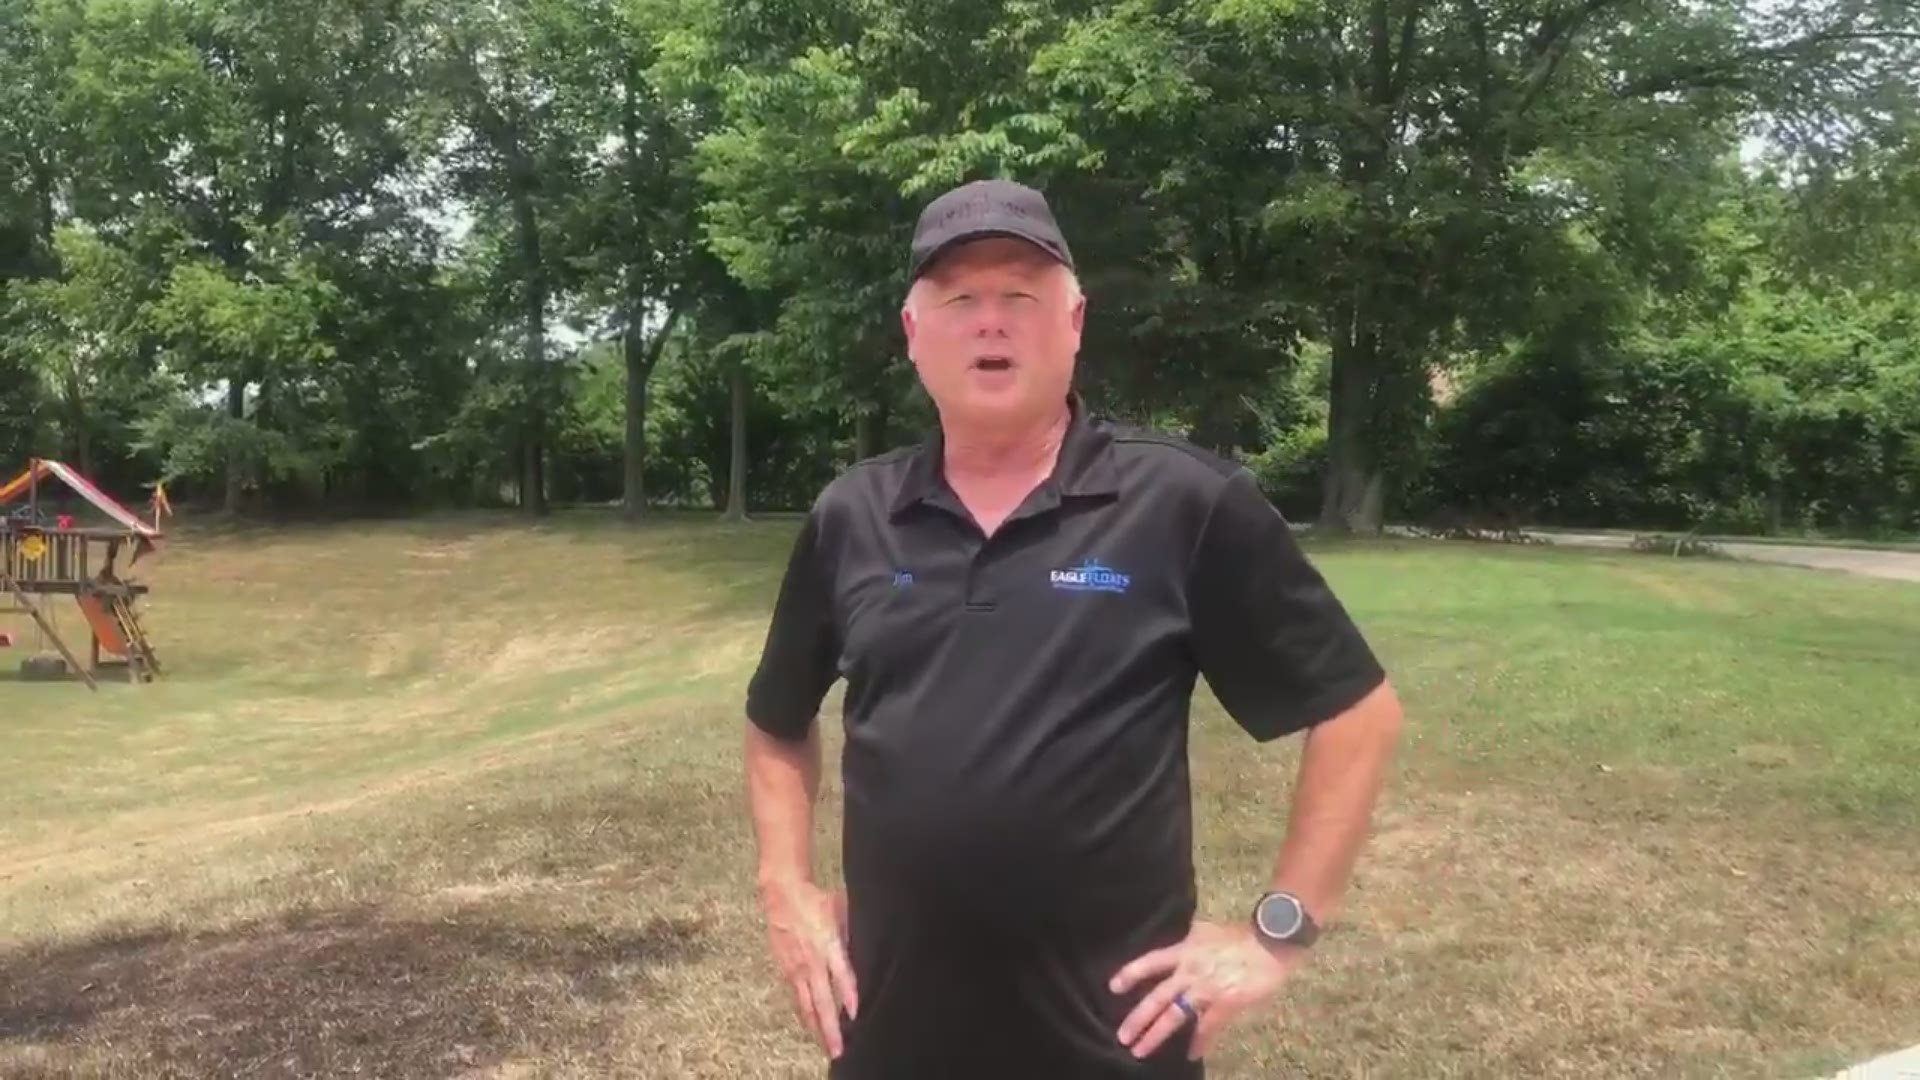 Senator Jim Hendren has a message for Arkansans as we enter the holiday weekend. He doesn’t want you to have to go through what he encountered in the last 24 hours.